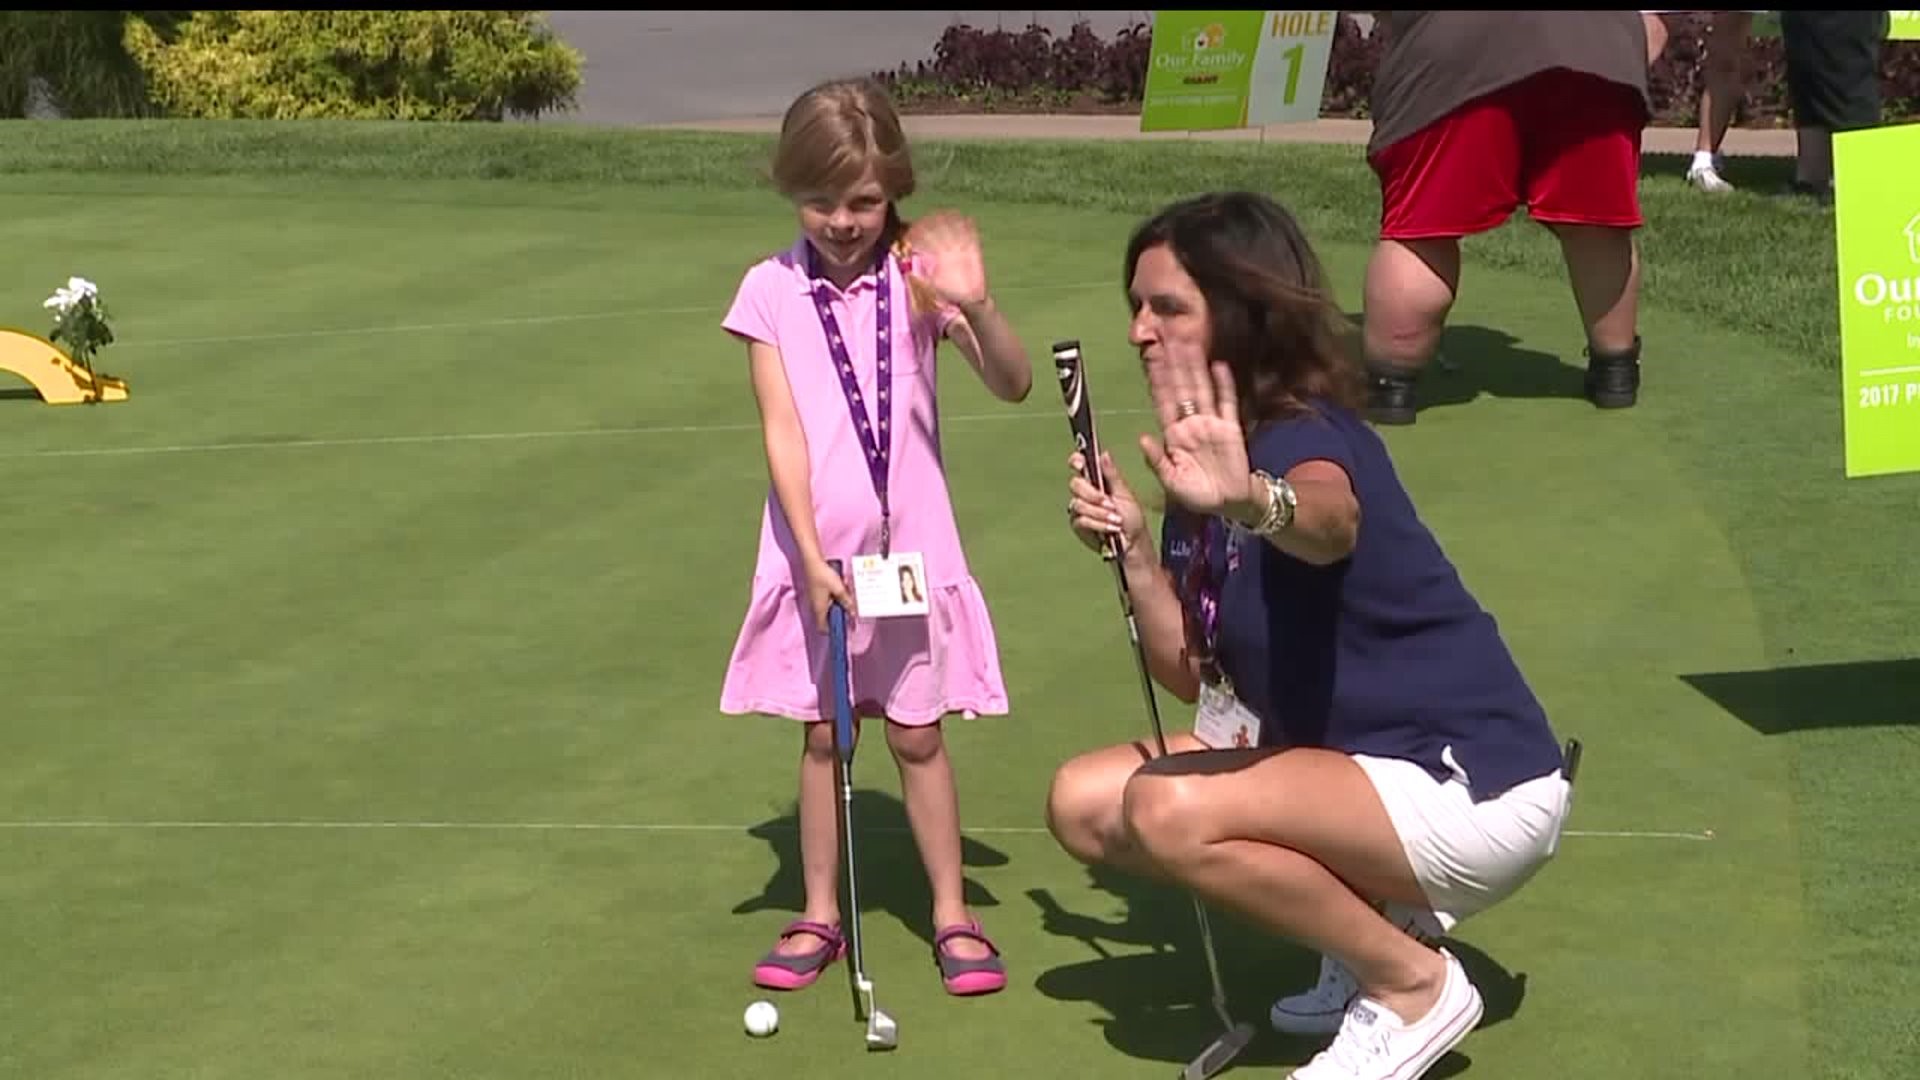 Local personalities put their golf skills to the test at 18th Annual Celebrity Putting Contest in Dauphin County